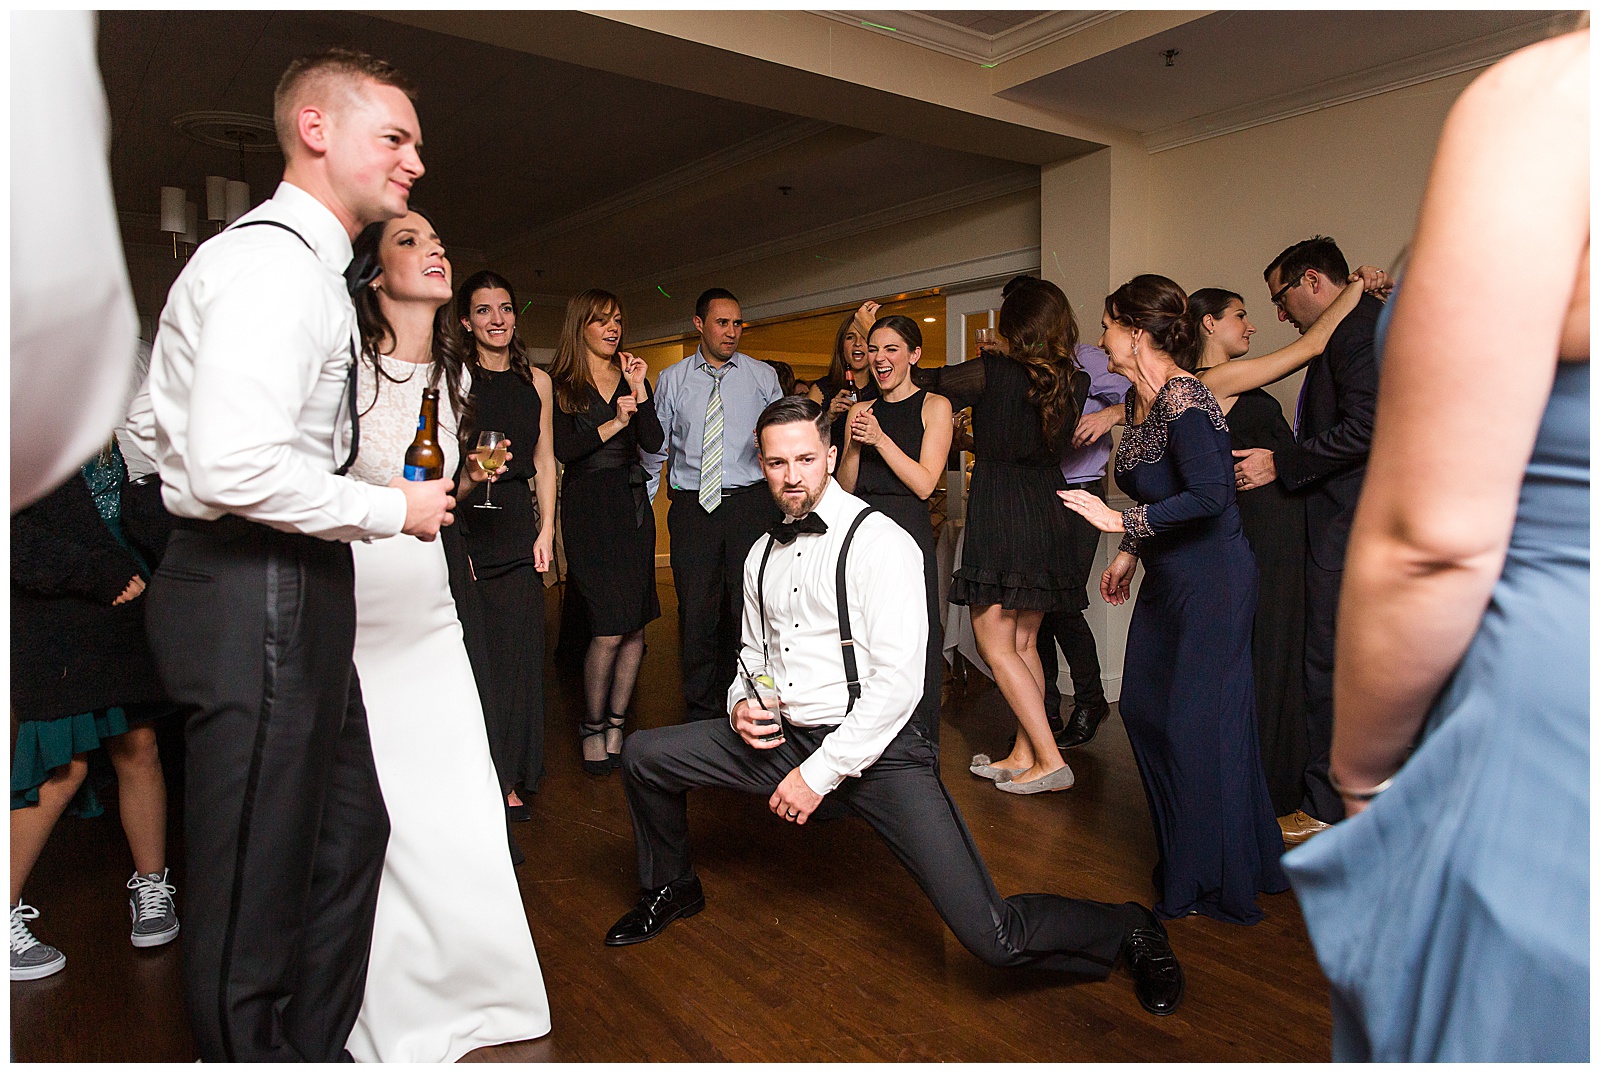 Guests dance the night away to Young Love and the Thrills